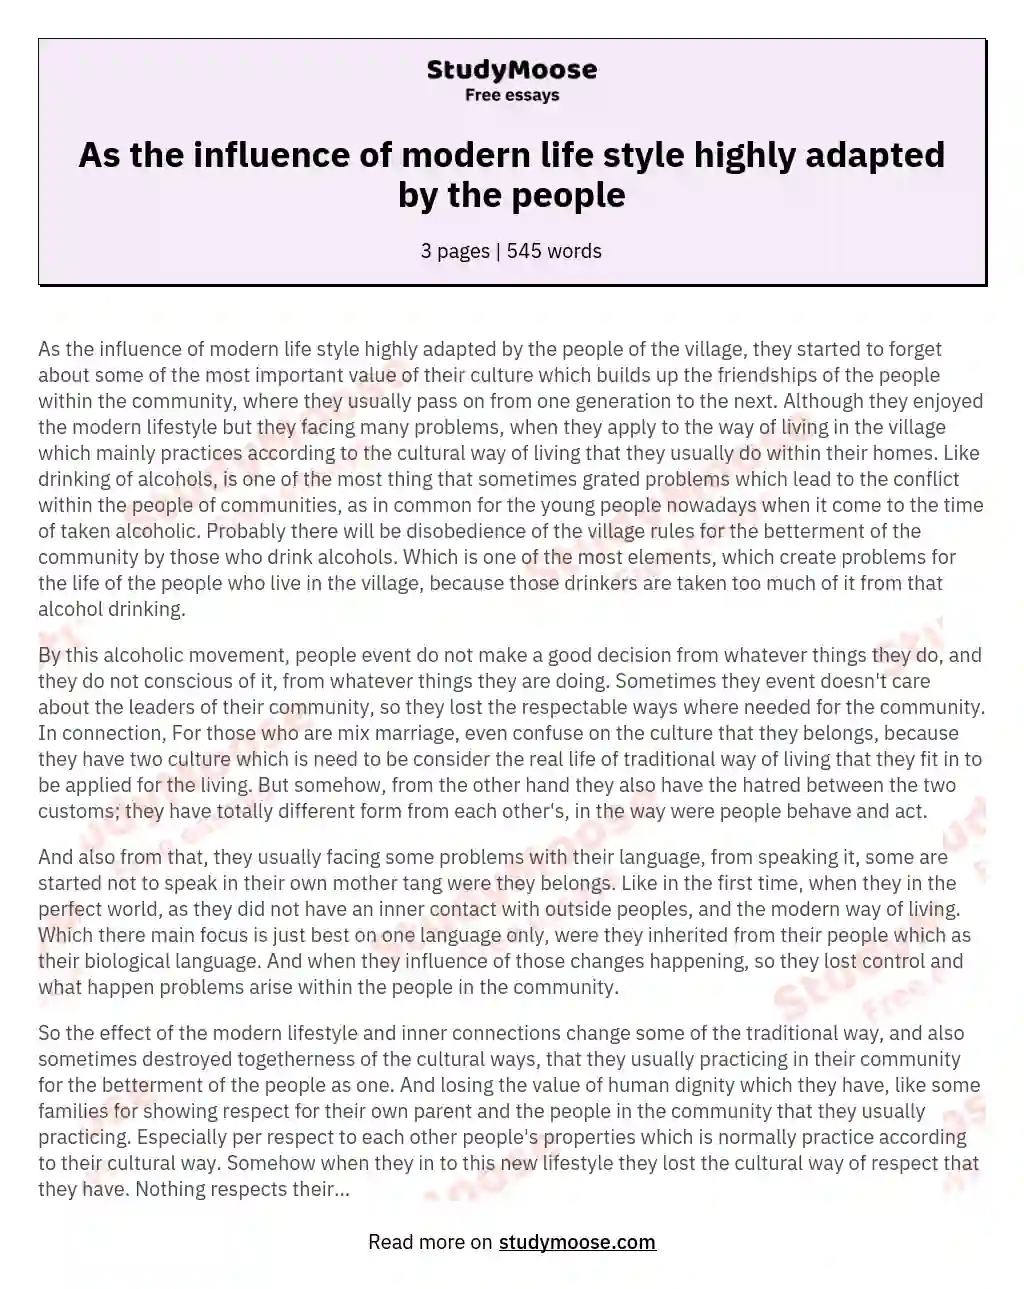 As the influence of modern life style highly adapted by the people essay